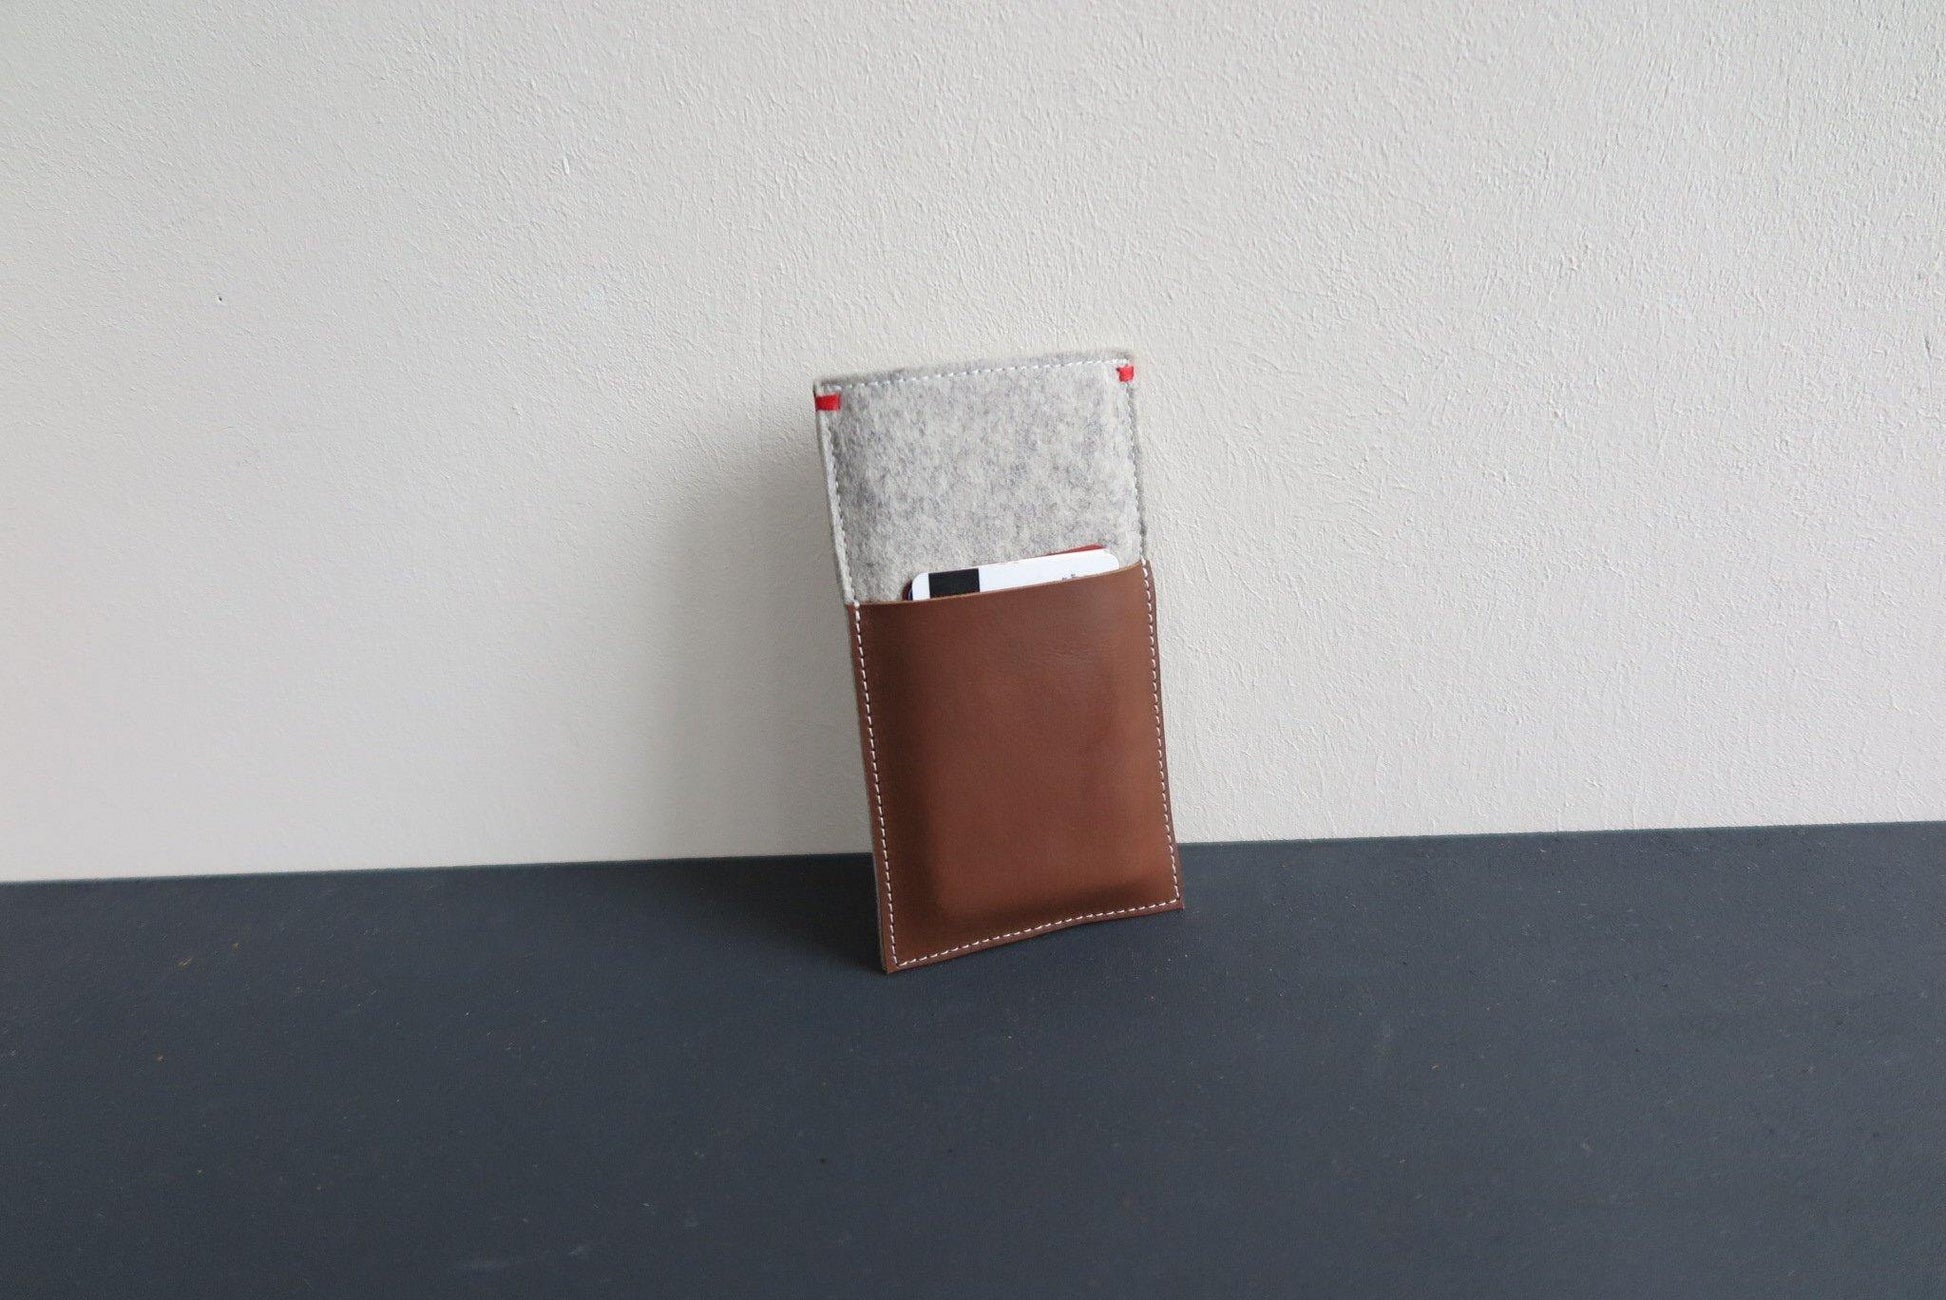 Wool felt iPhone x case with leather pocket for creditcards